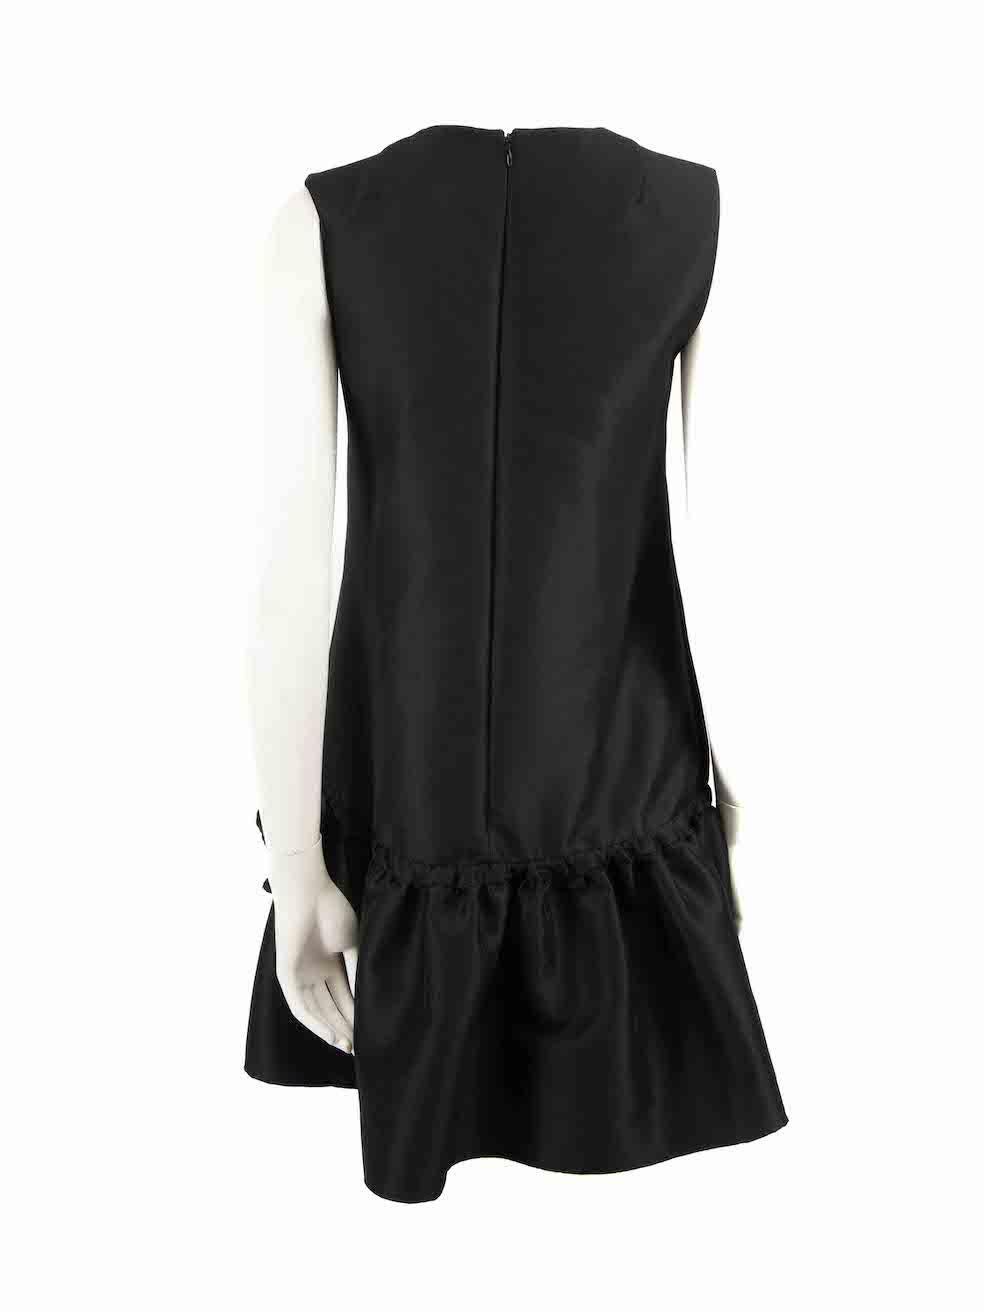 Victoria Beckham Black Ruffle Hem Shift Dress Size M In Good Condition For Sale In London, GB